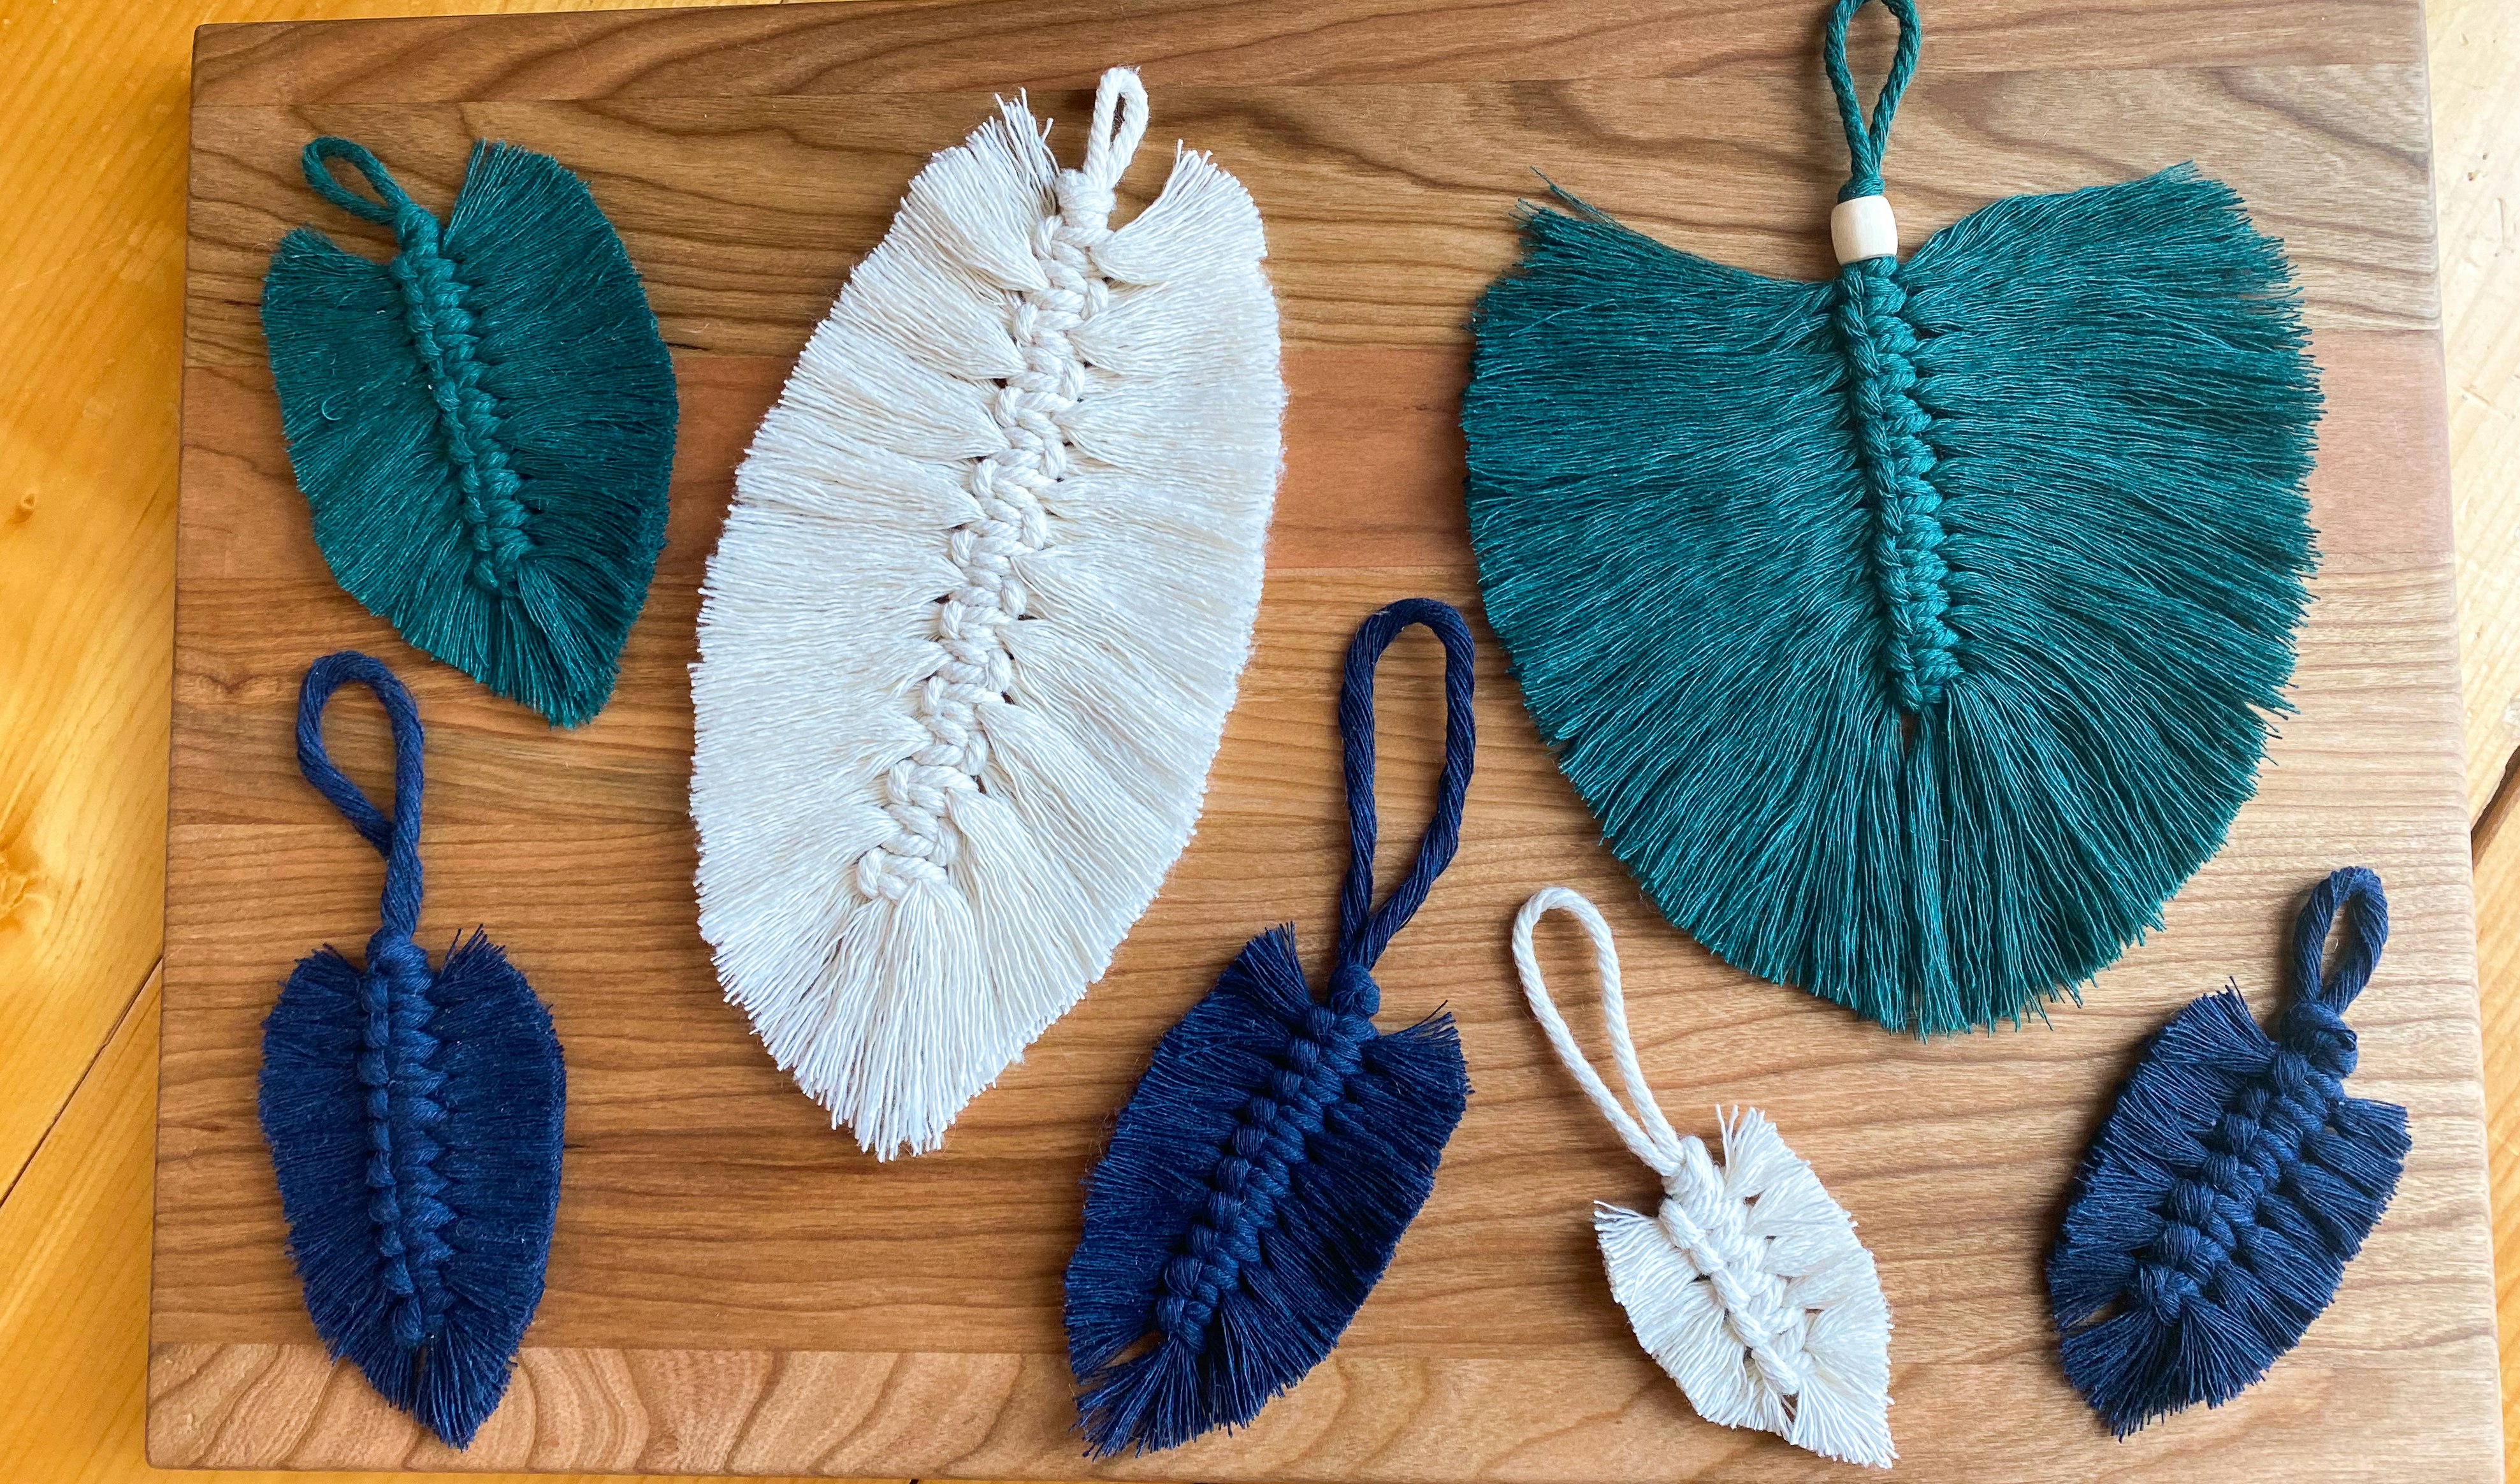 Feather Making with Woolen - DIY Room Decor - Amazing Wool Craft Ideas -  How to Make Yarn Feather